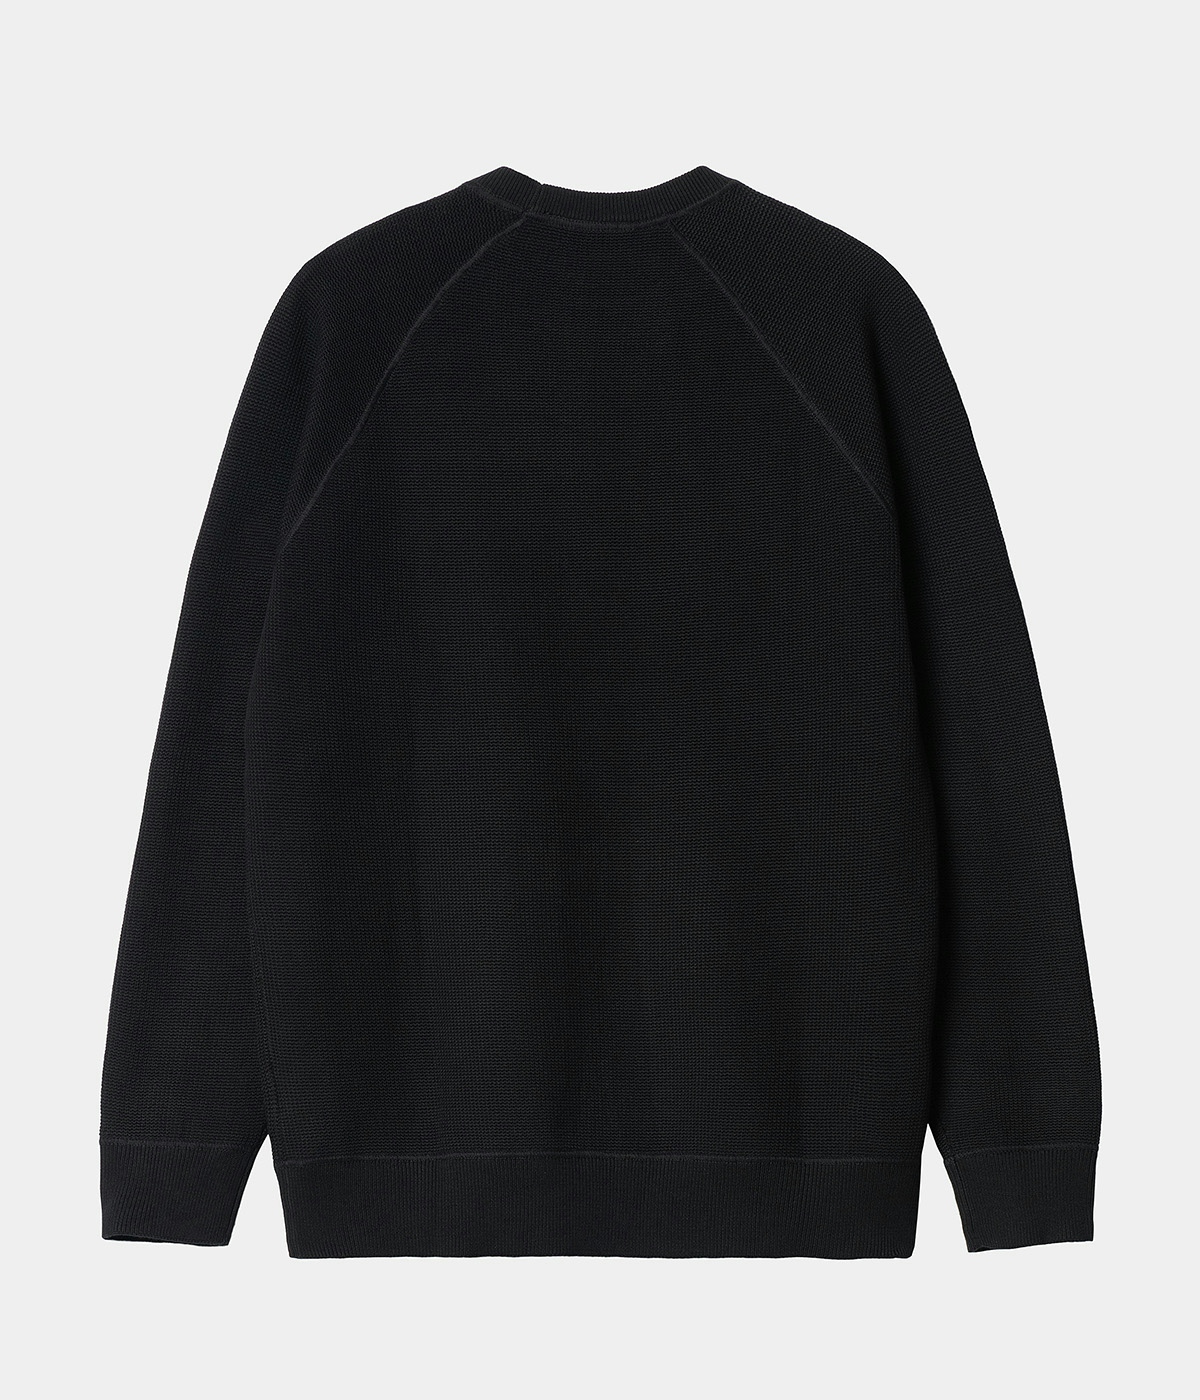 Carhartt Chase Sweater Black / Gold 2